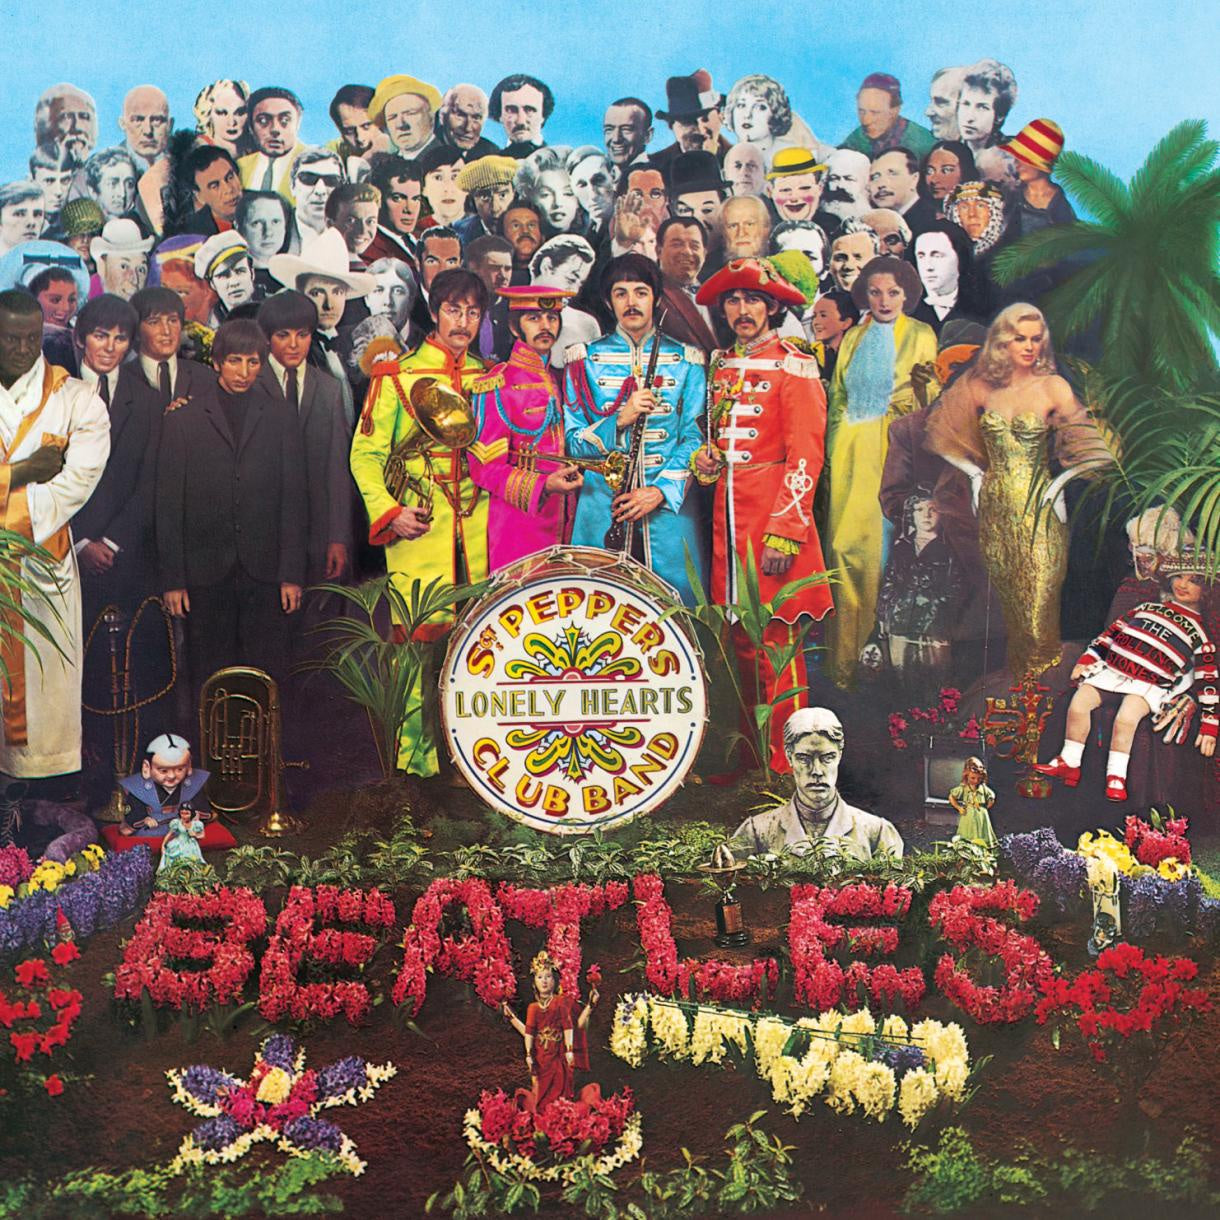 The Beatles – Sgt. Pepper's Lonely Hearts Club Band (1967) - New LP Record 2017 Parlophone USA 180 gram Vinyl & Insert - Rock & Roll / Psychedelic Rock